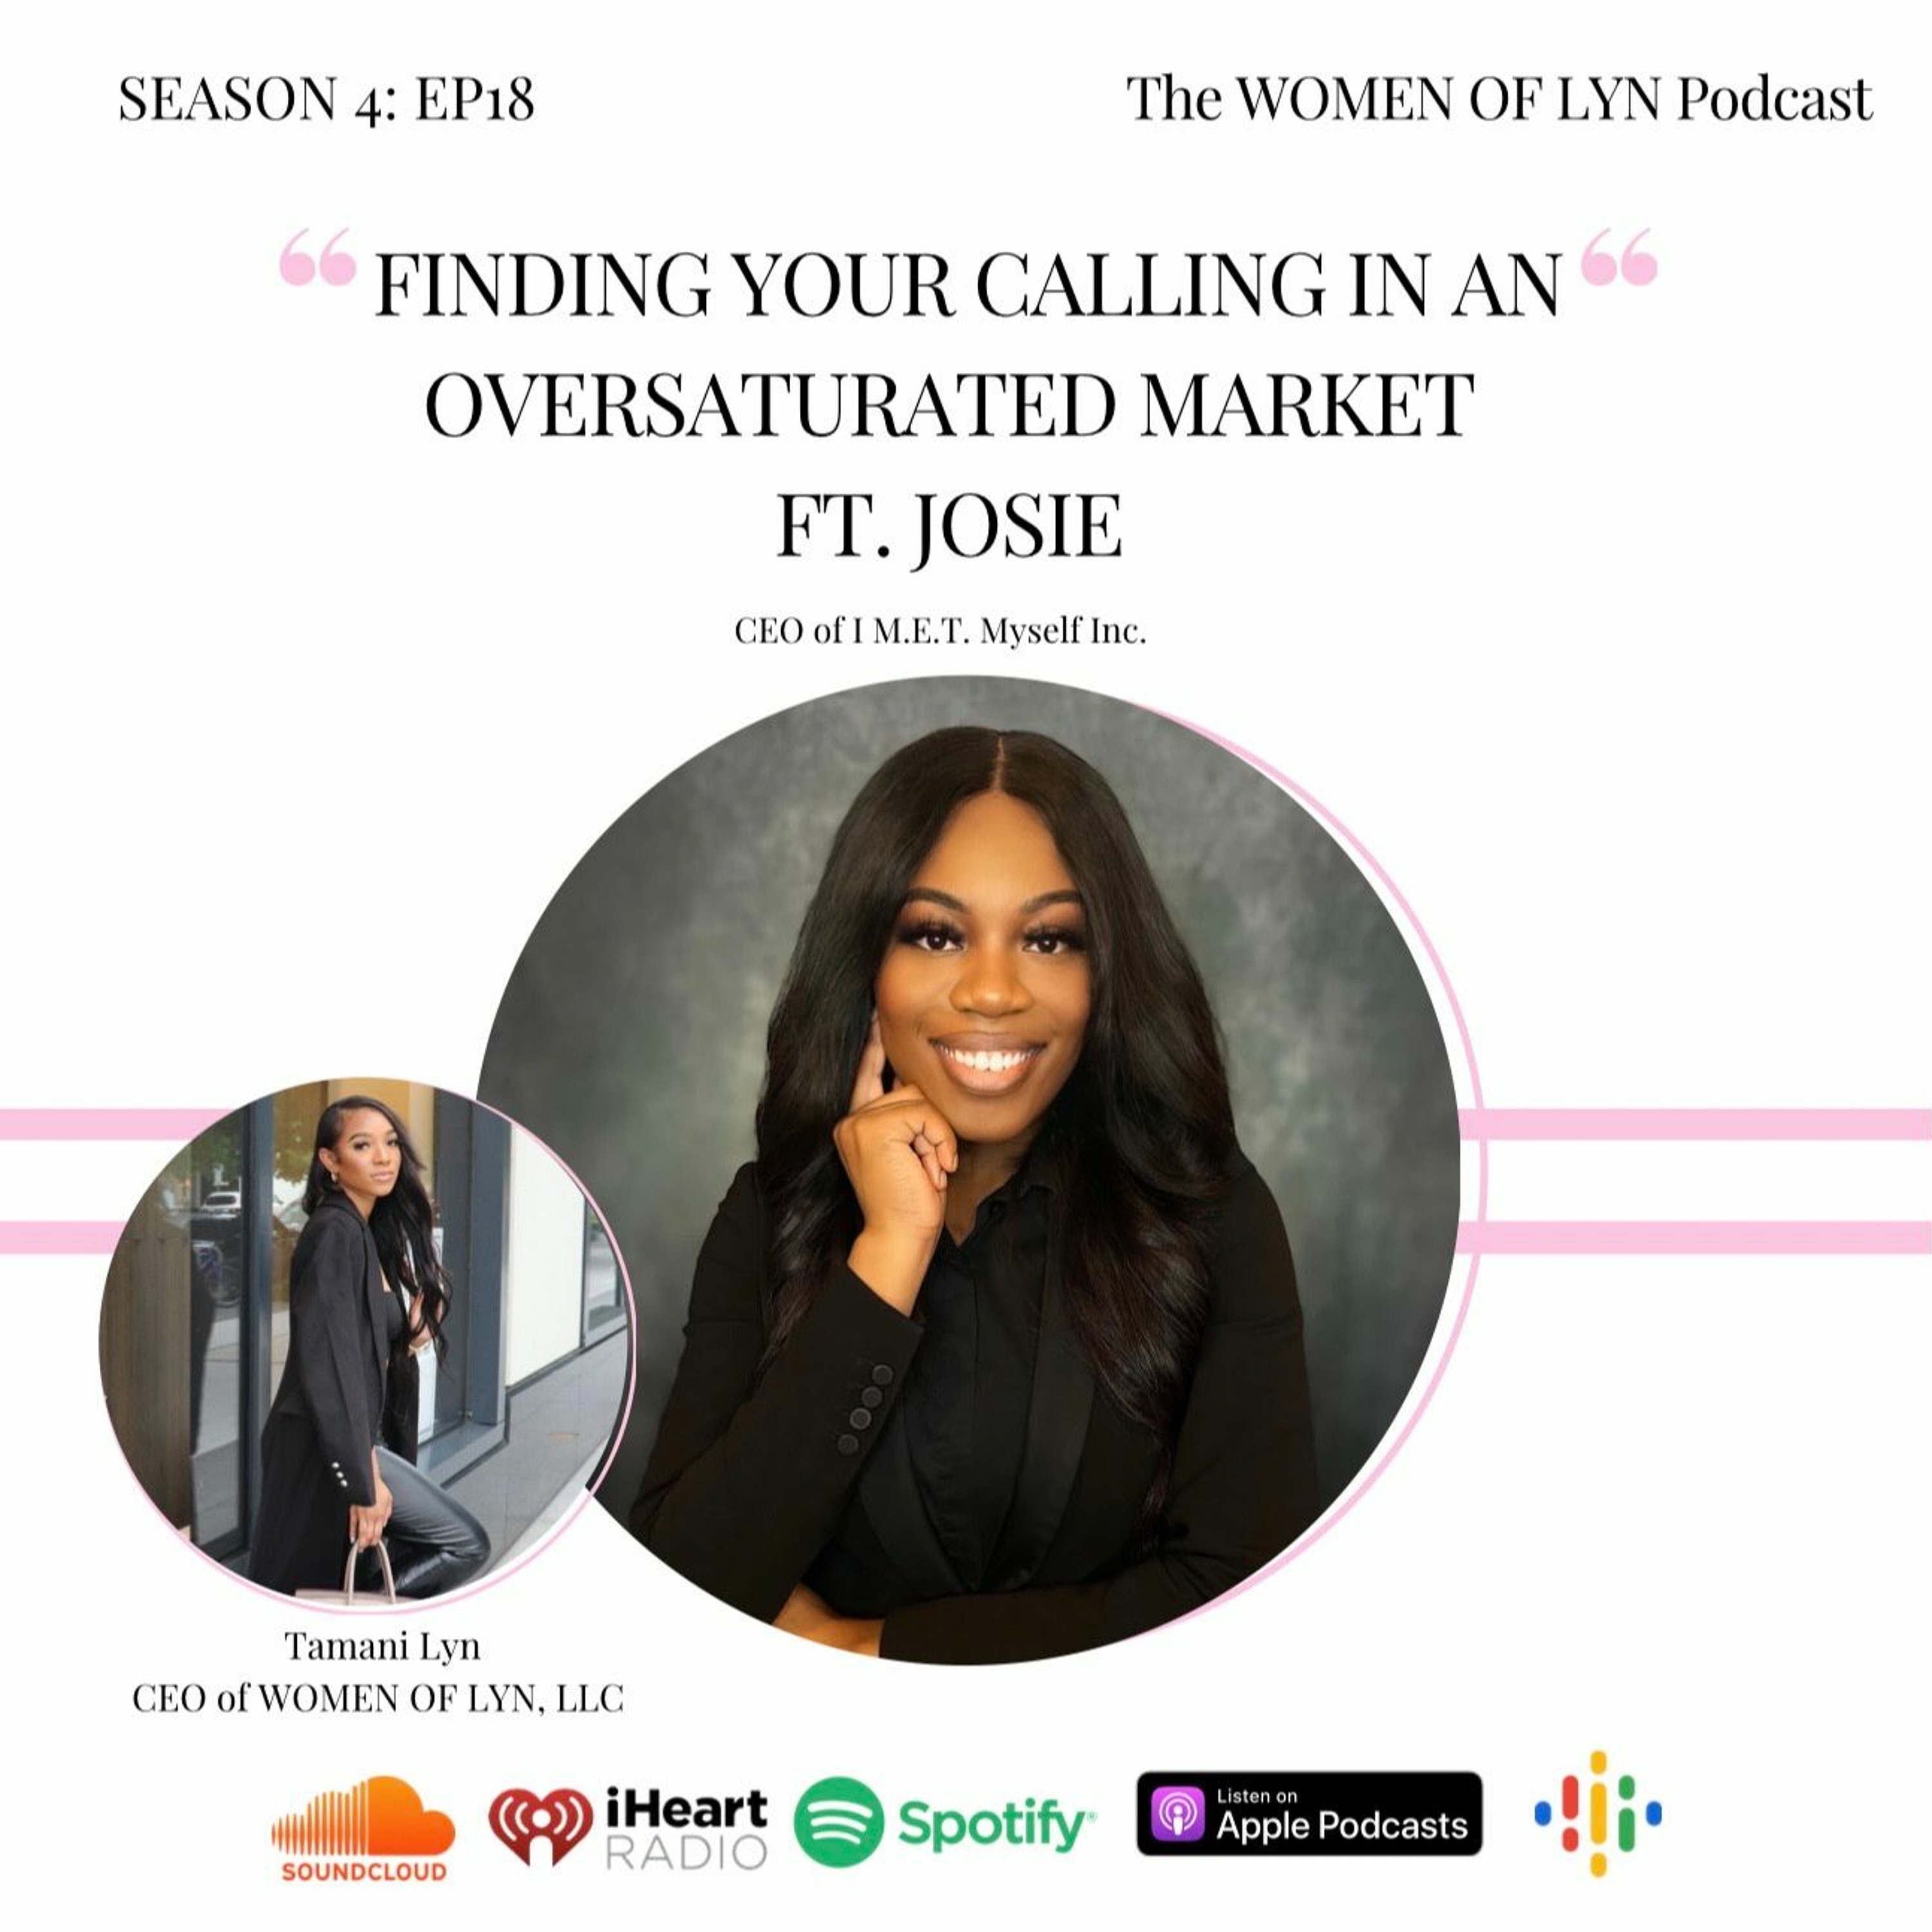 Episode 18: ”Finding Your Calling In An Oversaturated Market” Ft. Josie Ade